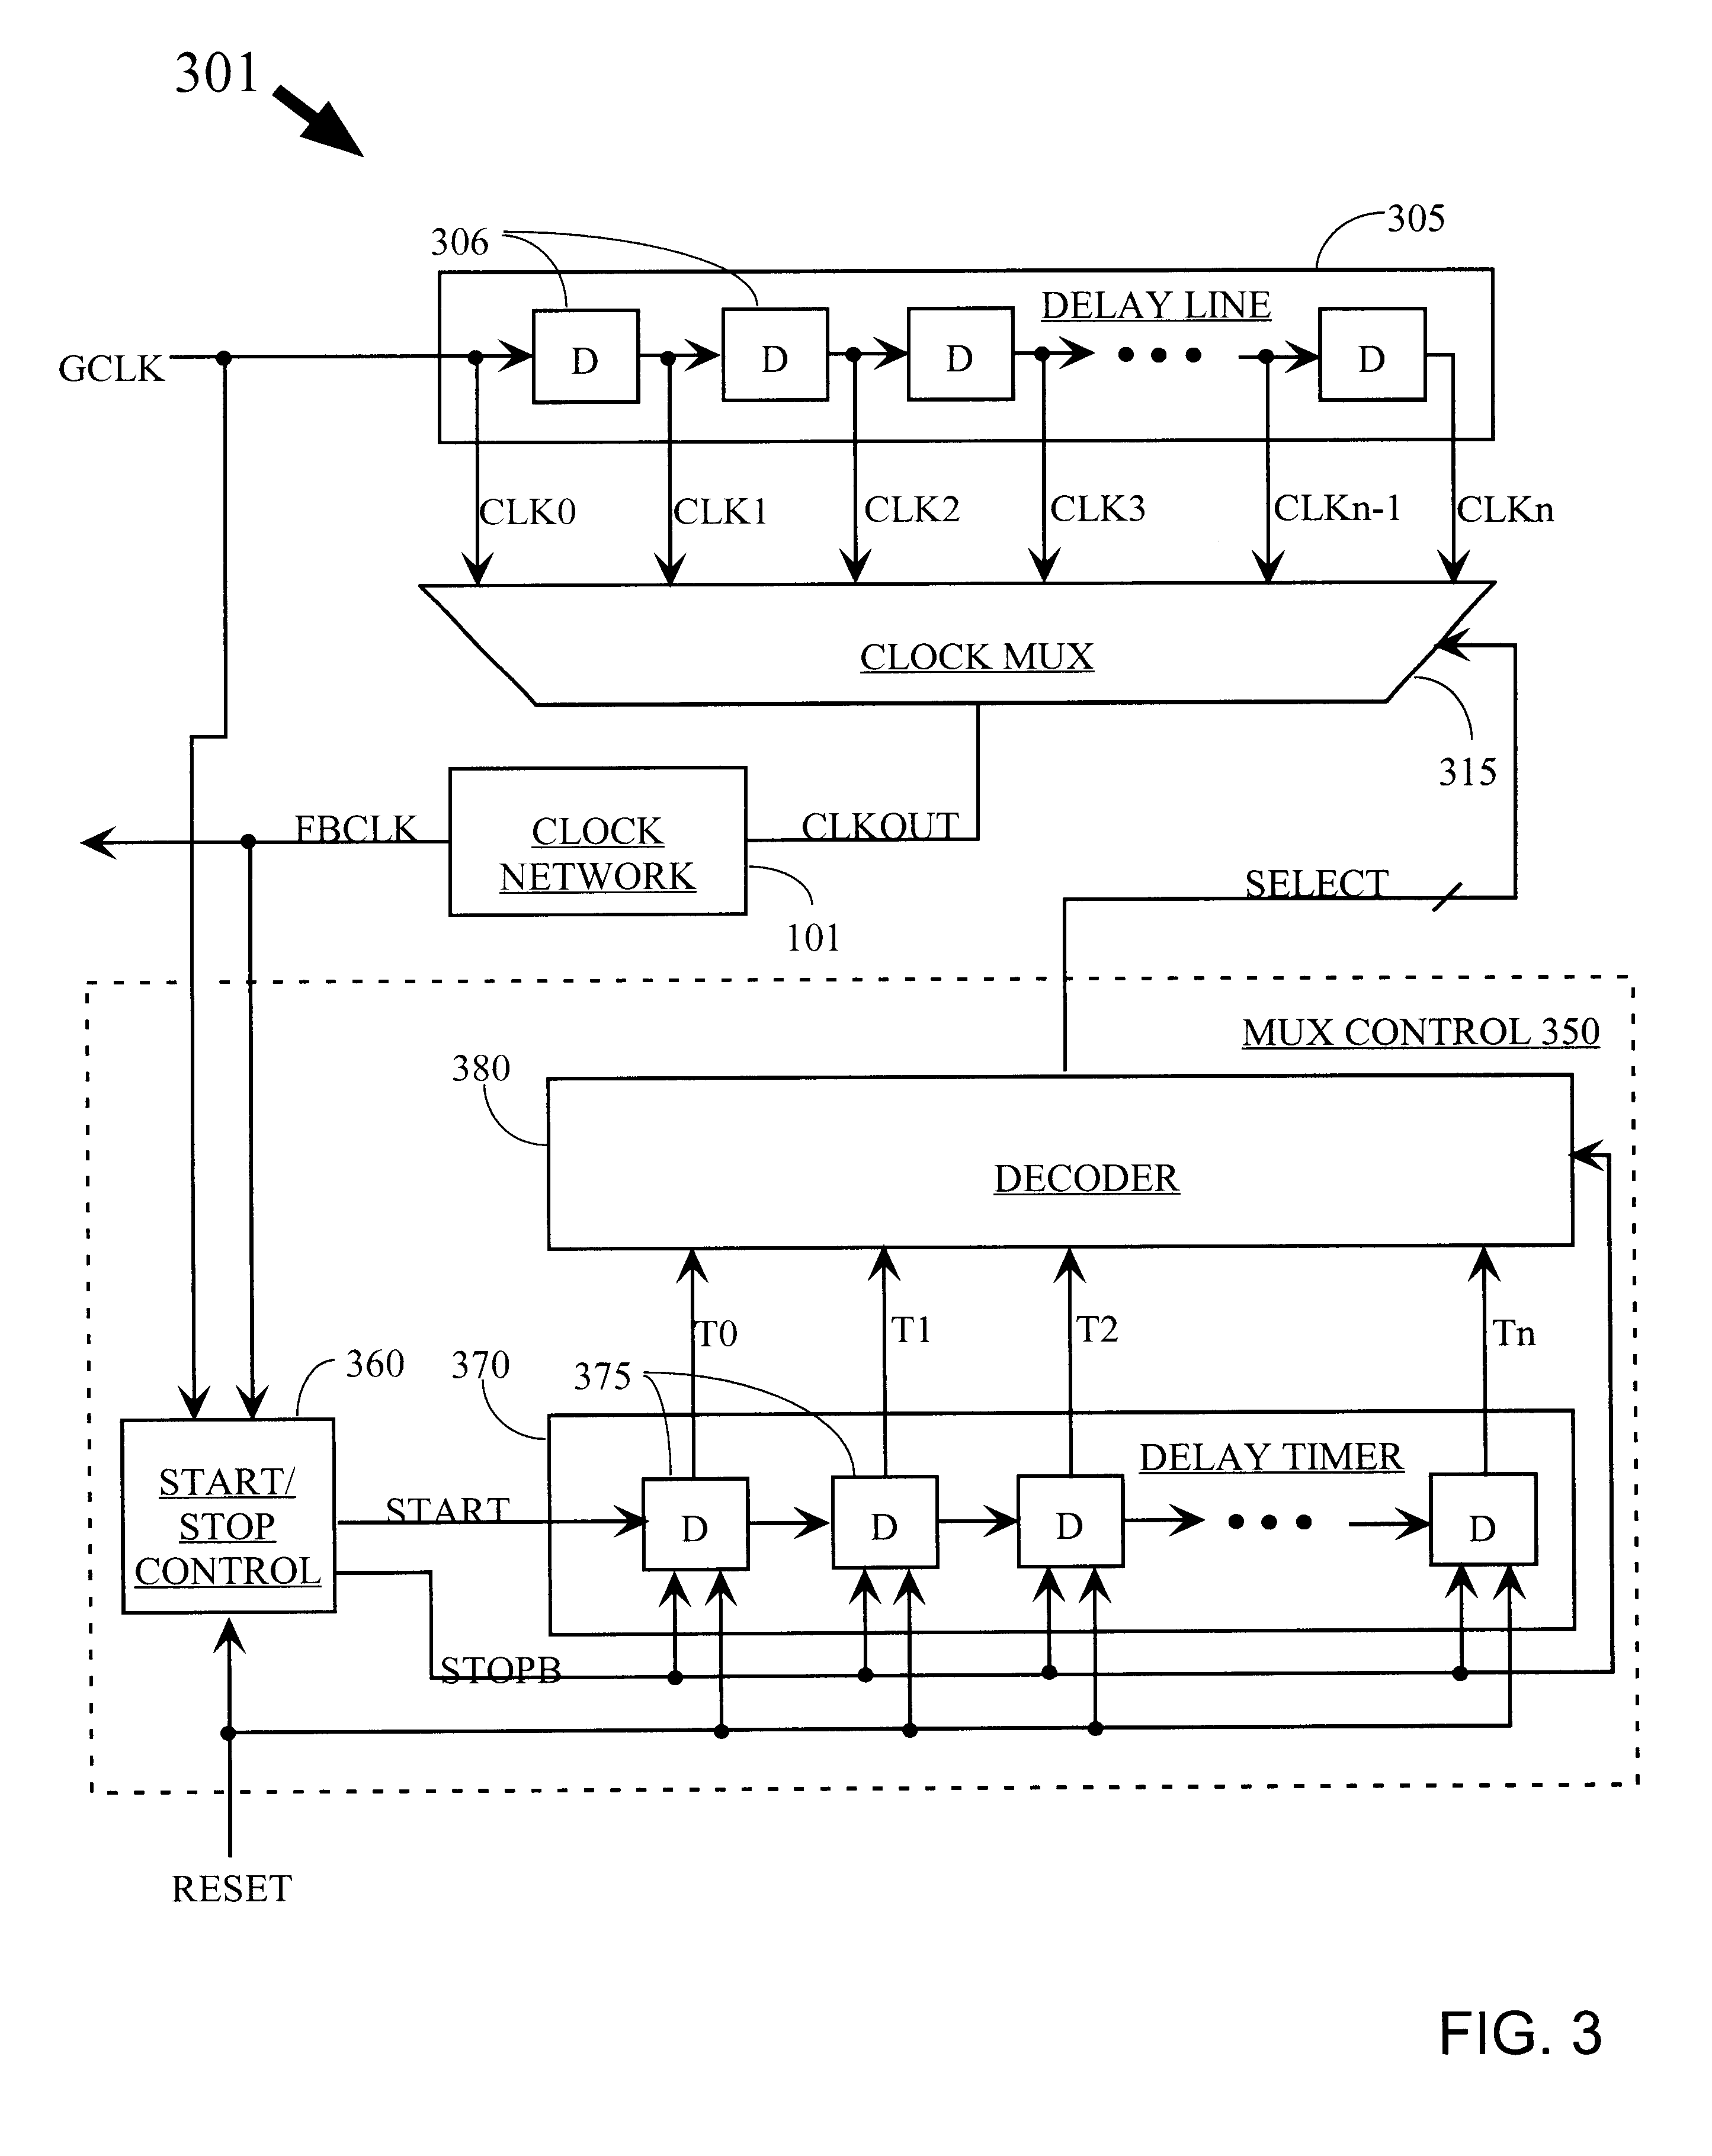 One-shot DLL circuit and method